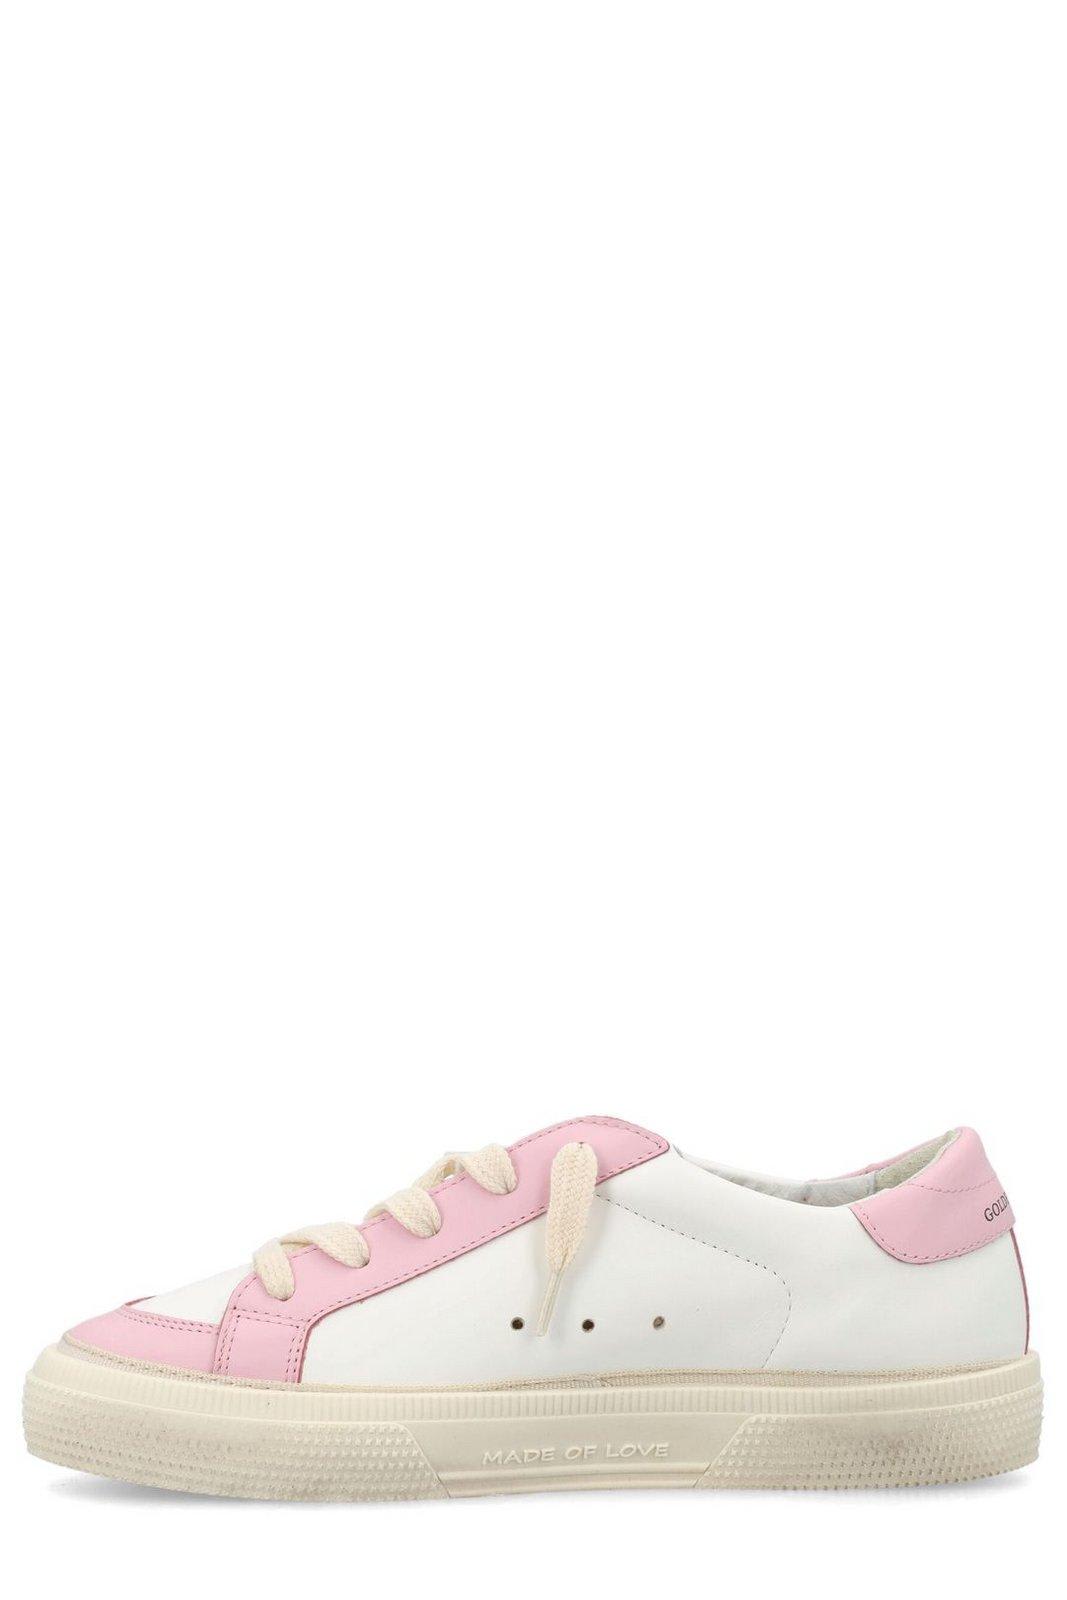 Shop Golden Goose May Lace-up Sneakers In Bianco/rosa